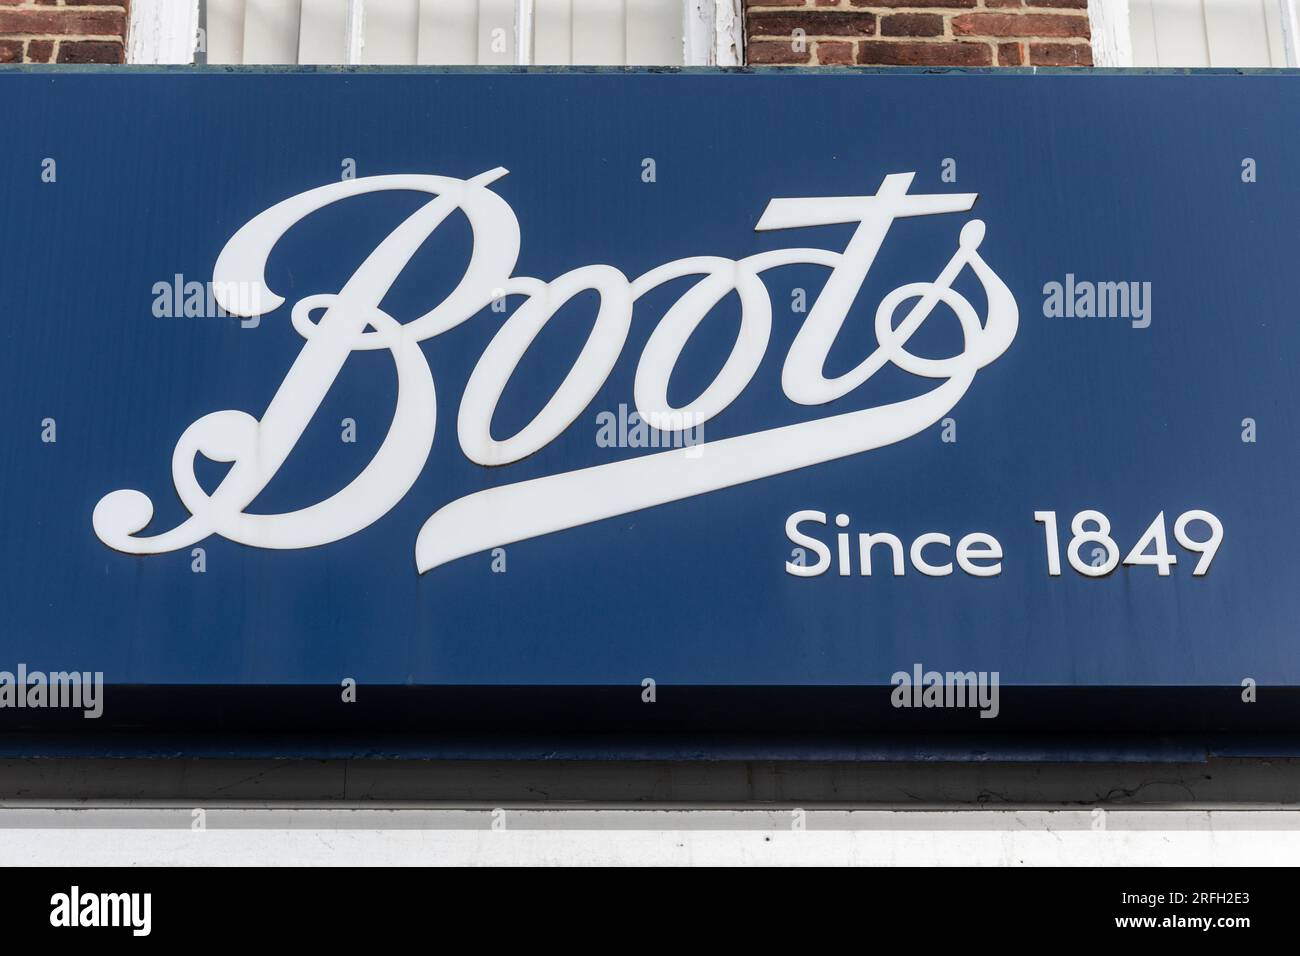 Boots since 1849 sign or signage above Boots the Chemist shop, England, UK Stock Photo